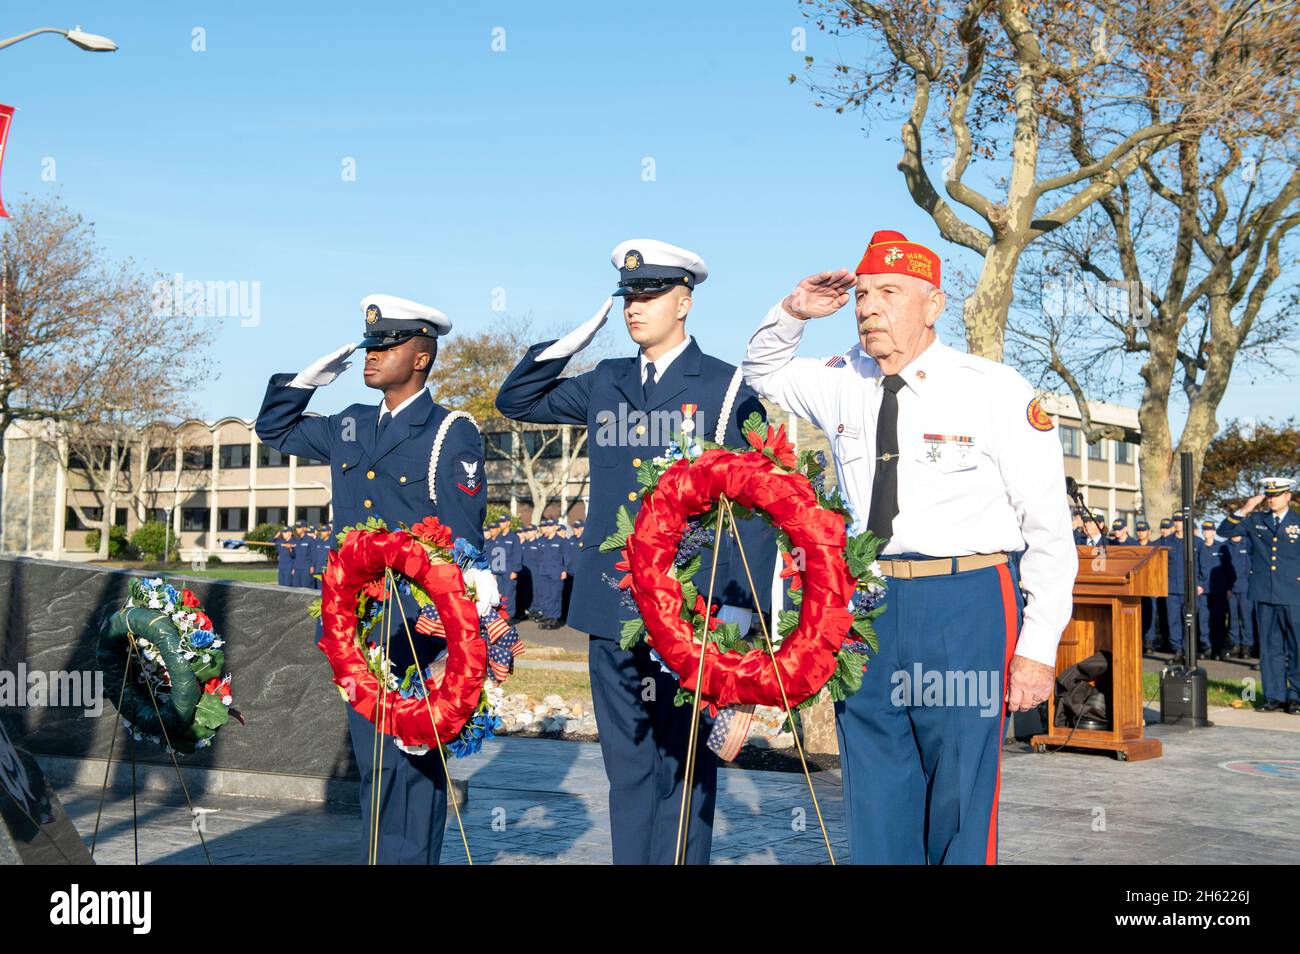 Cape May, United States of America. 11 November, 2021. U.S. Coast Guard and veterans salute during a wreath ceremony honoring Veterans Day at Recruitment Center Cape May, November 11, 2021 in Cape May, New Jersey. Credit: Seaman Christian Lower/USCG Photo/Alamy Live News Stock Photo